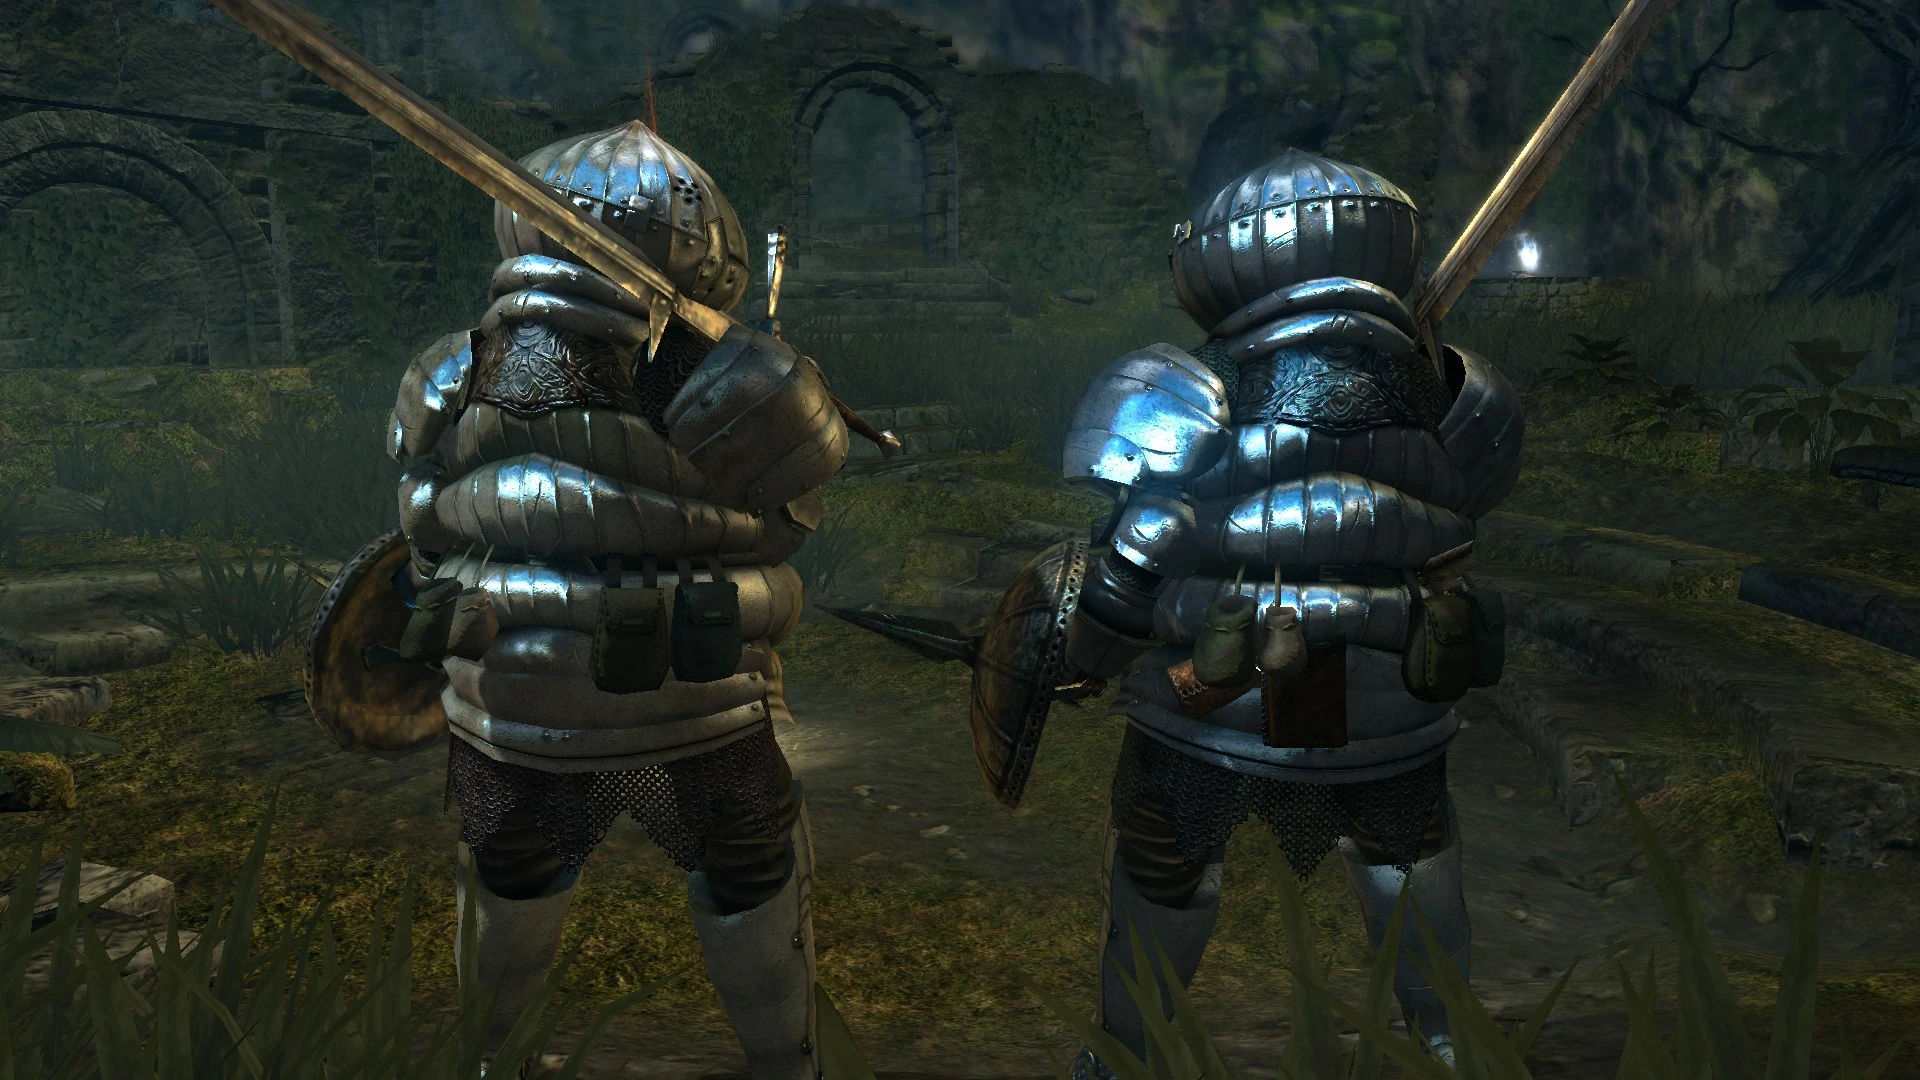 ultimate catarina set ds2 edition at dark souls 2 nexus mods and.